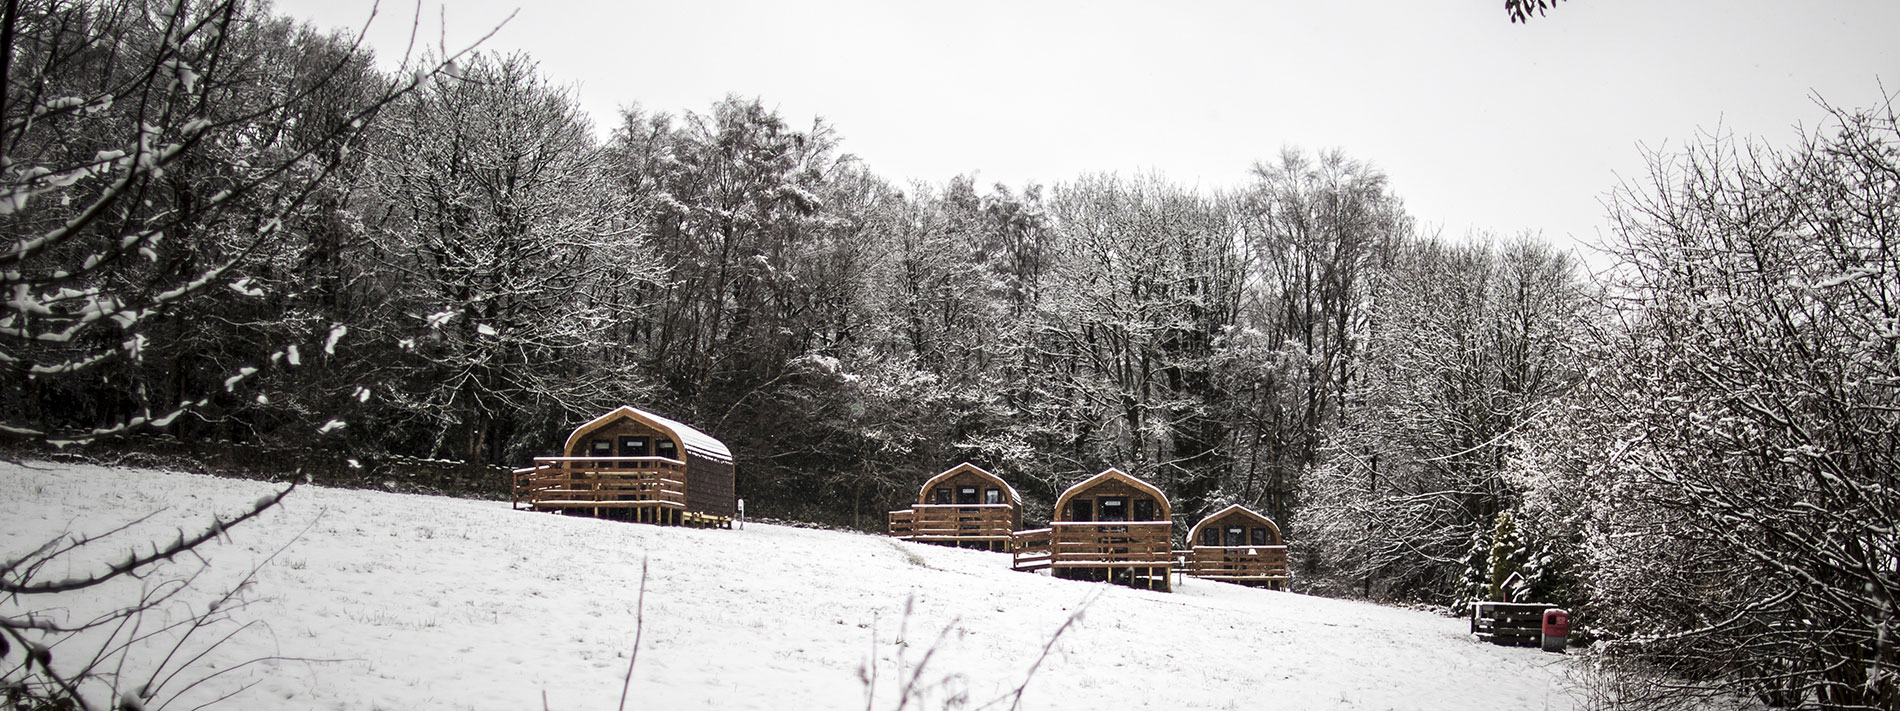 Cabins in Snow